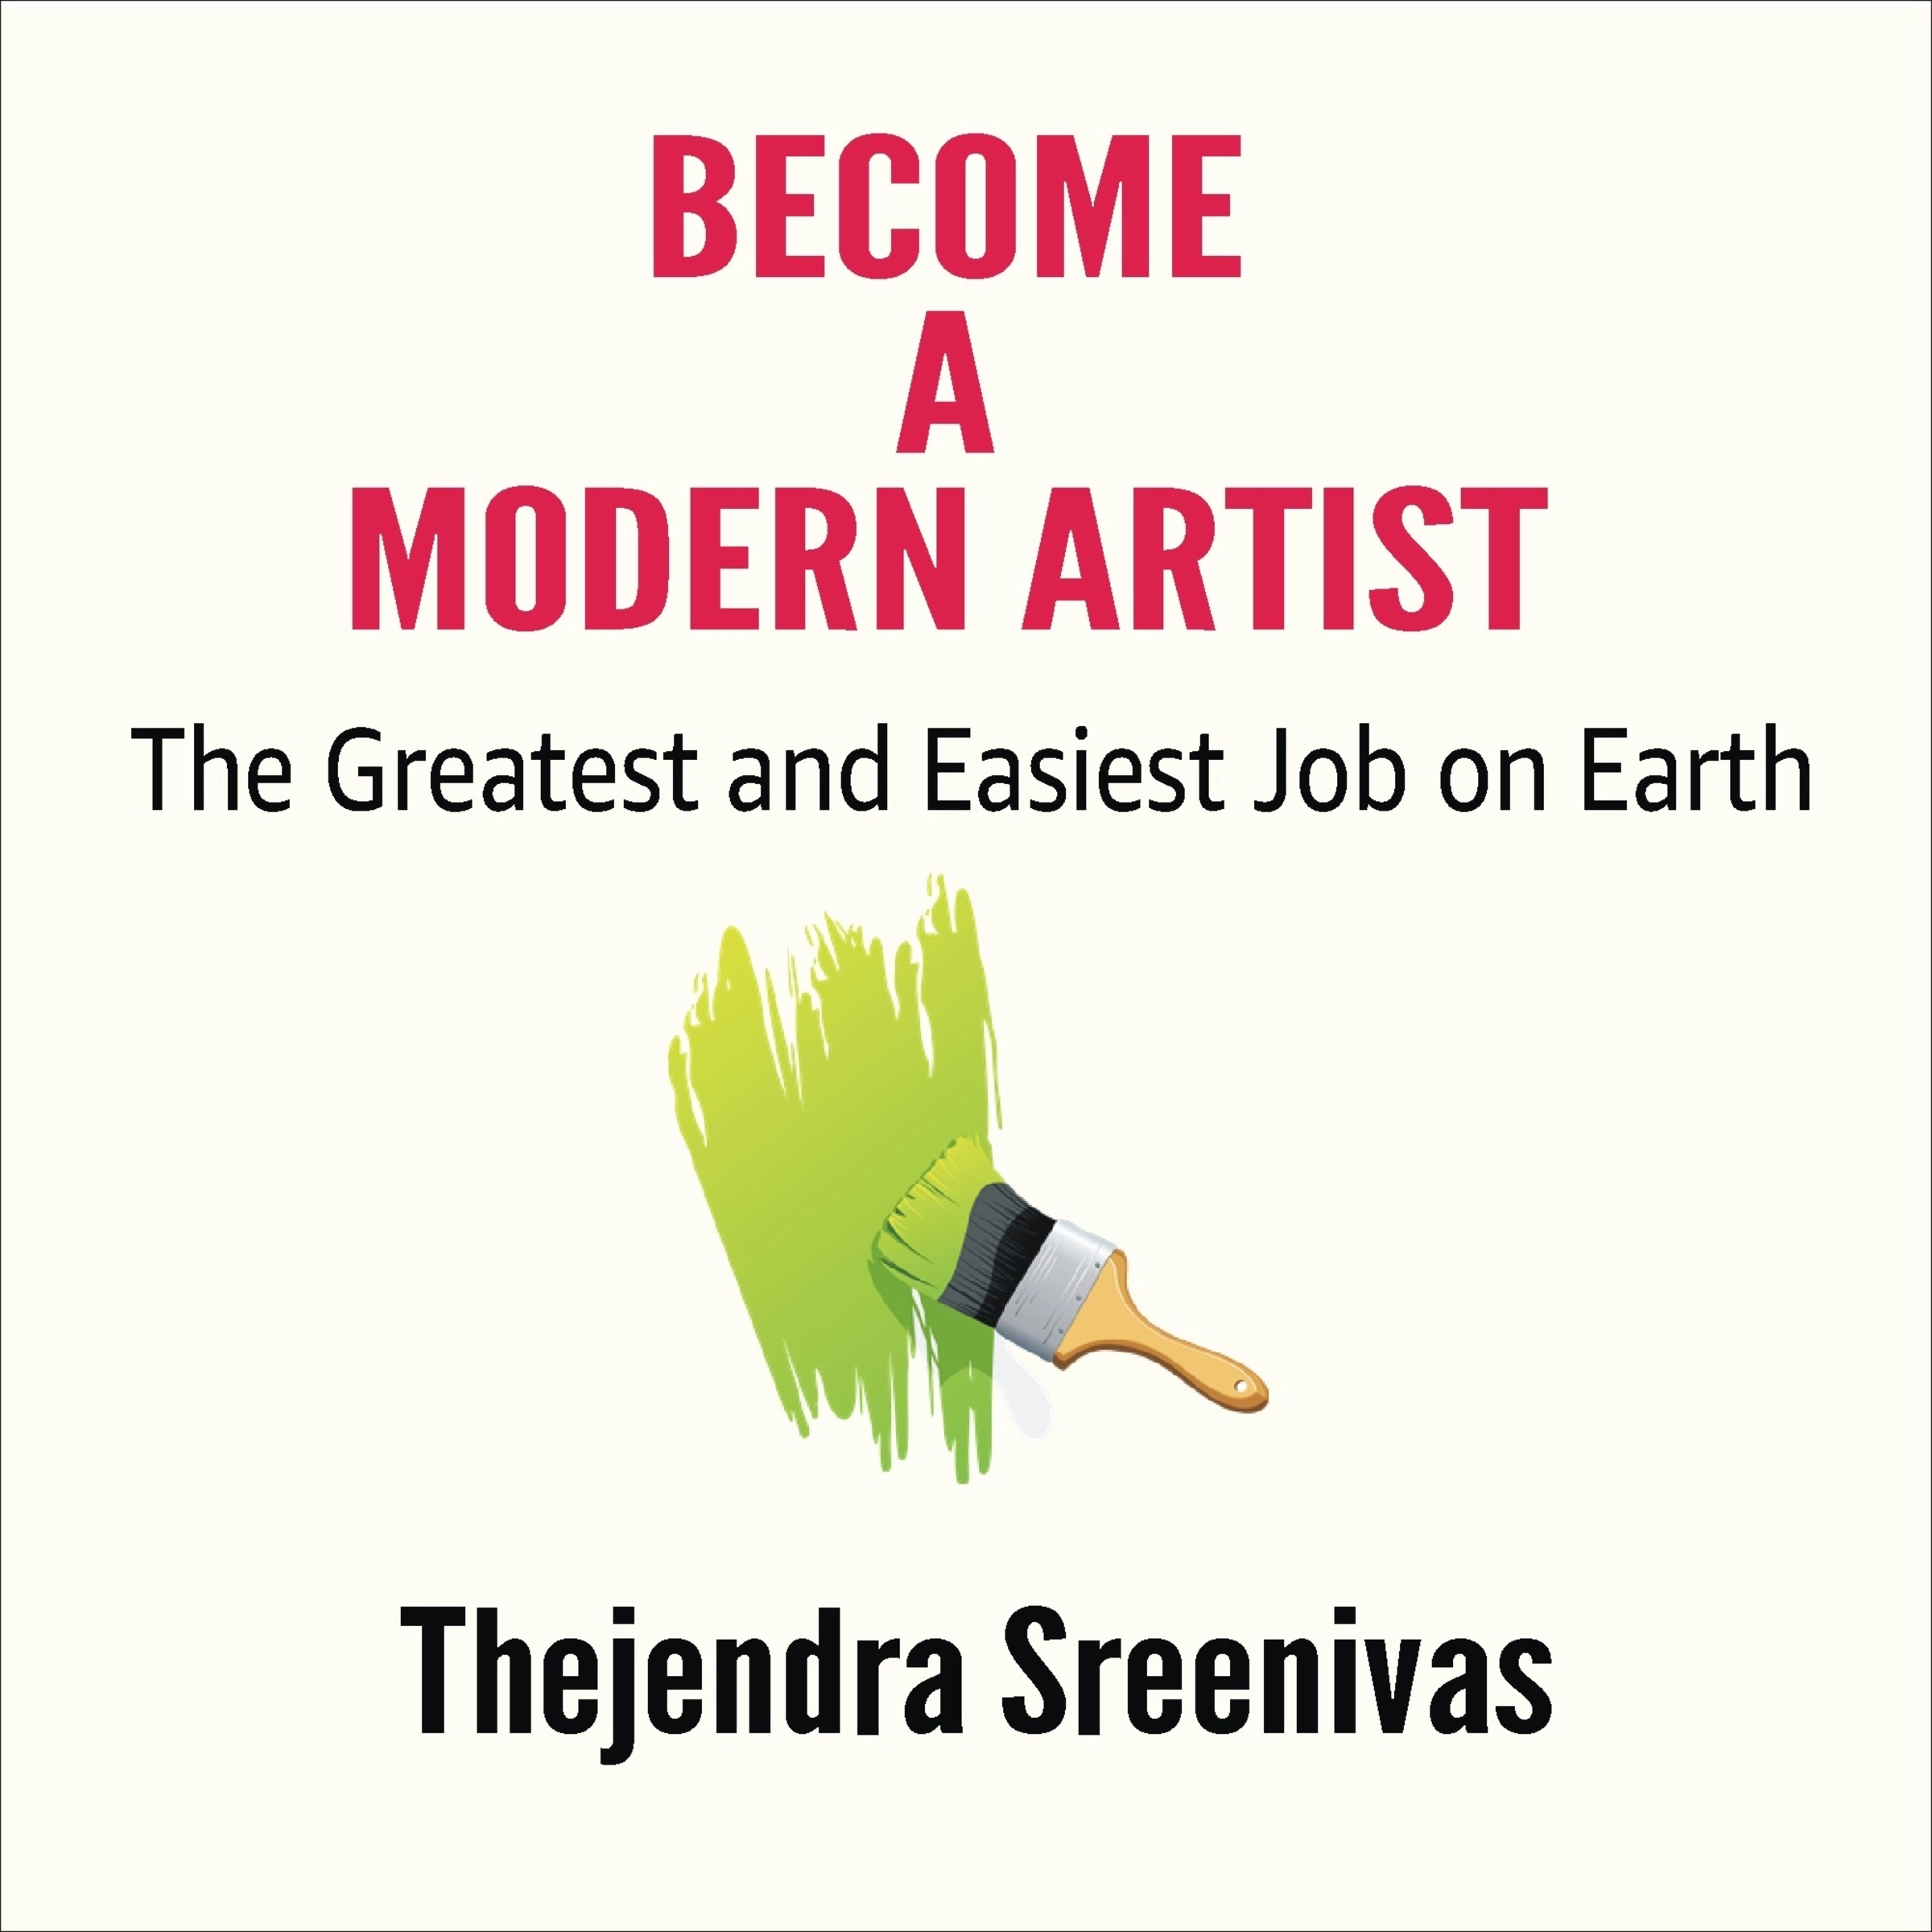 Become a Modern Artist - The Greatest and Easiest Job on Earth Audiobook by Thejendra Sreenivas